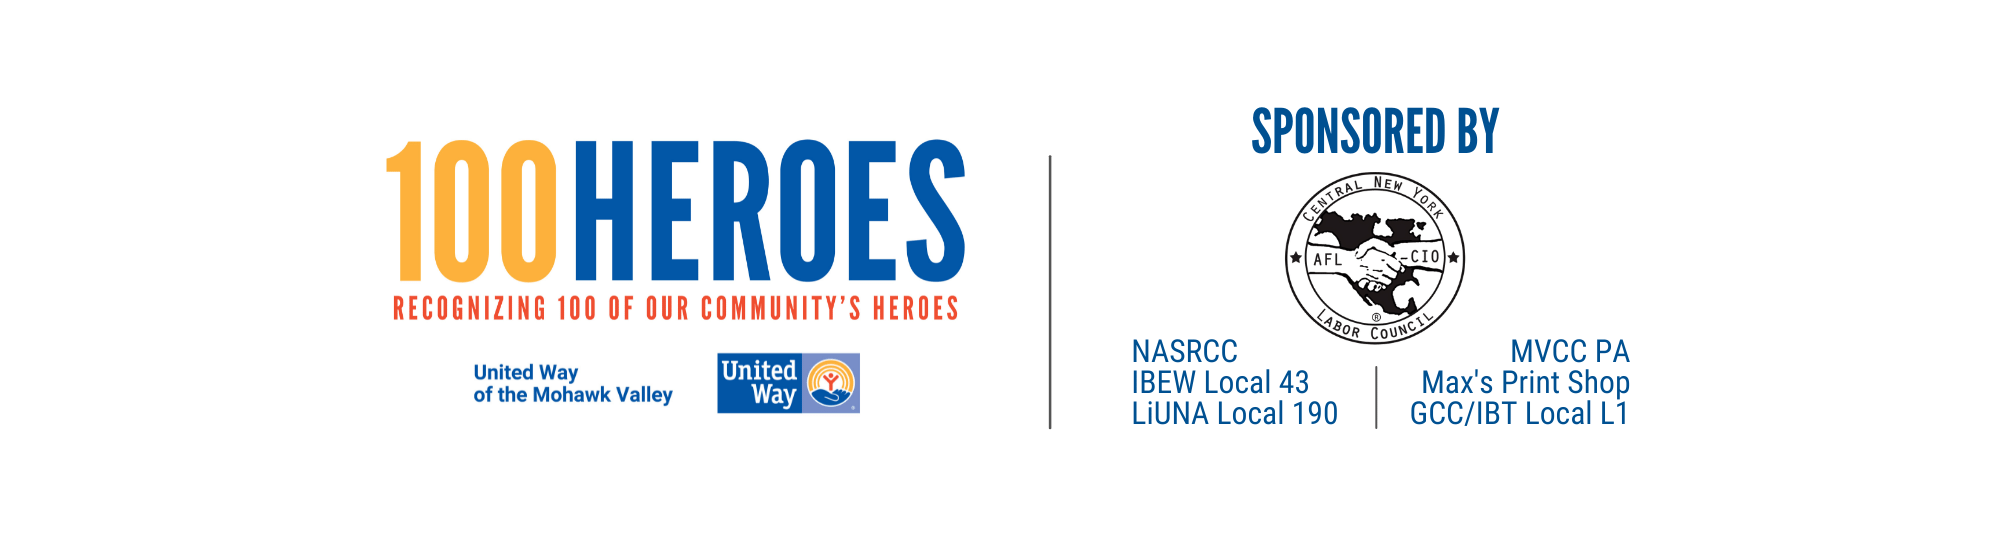 100 Heroes, Recognizing 100 of our local community's heroes